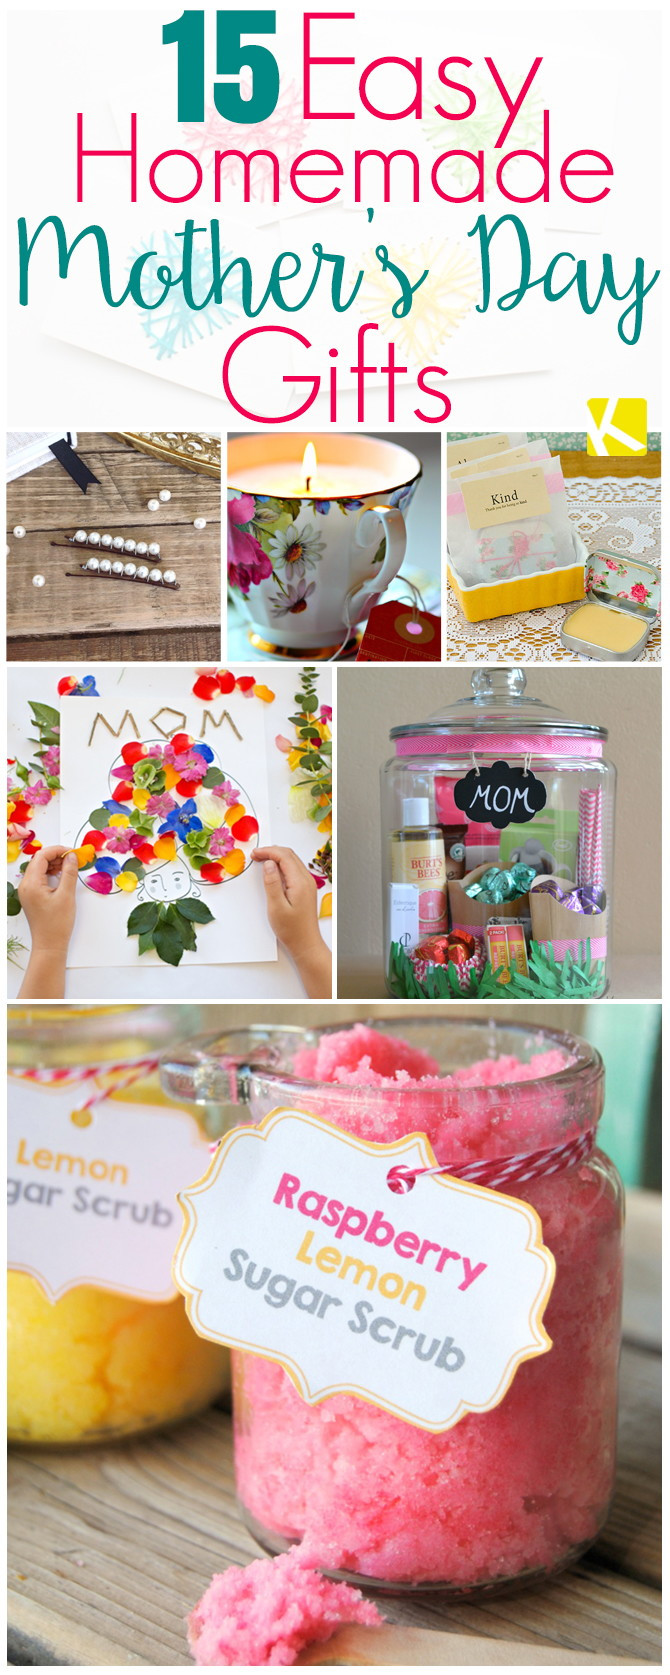 DIY Mothers Day Gifts From Kids
 15 Mother’s Day Gifts That Are Ridiculously Easy to Make